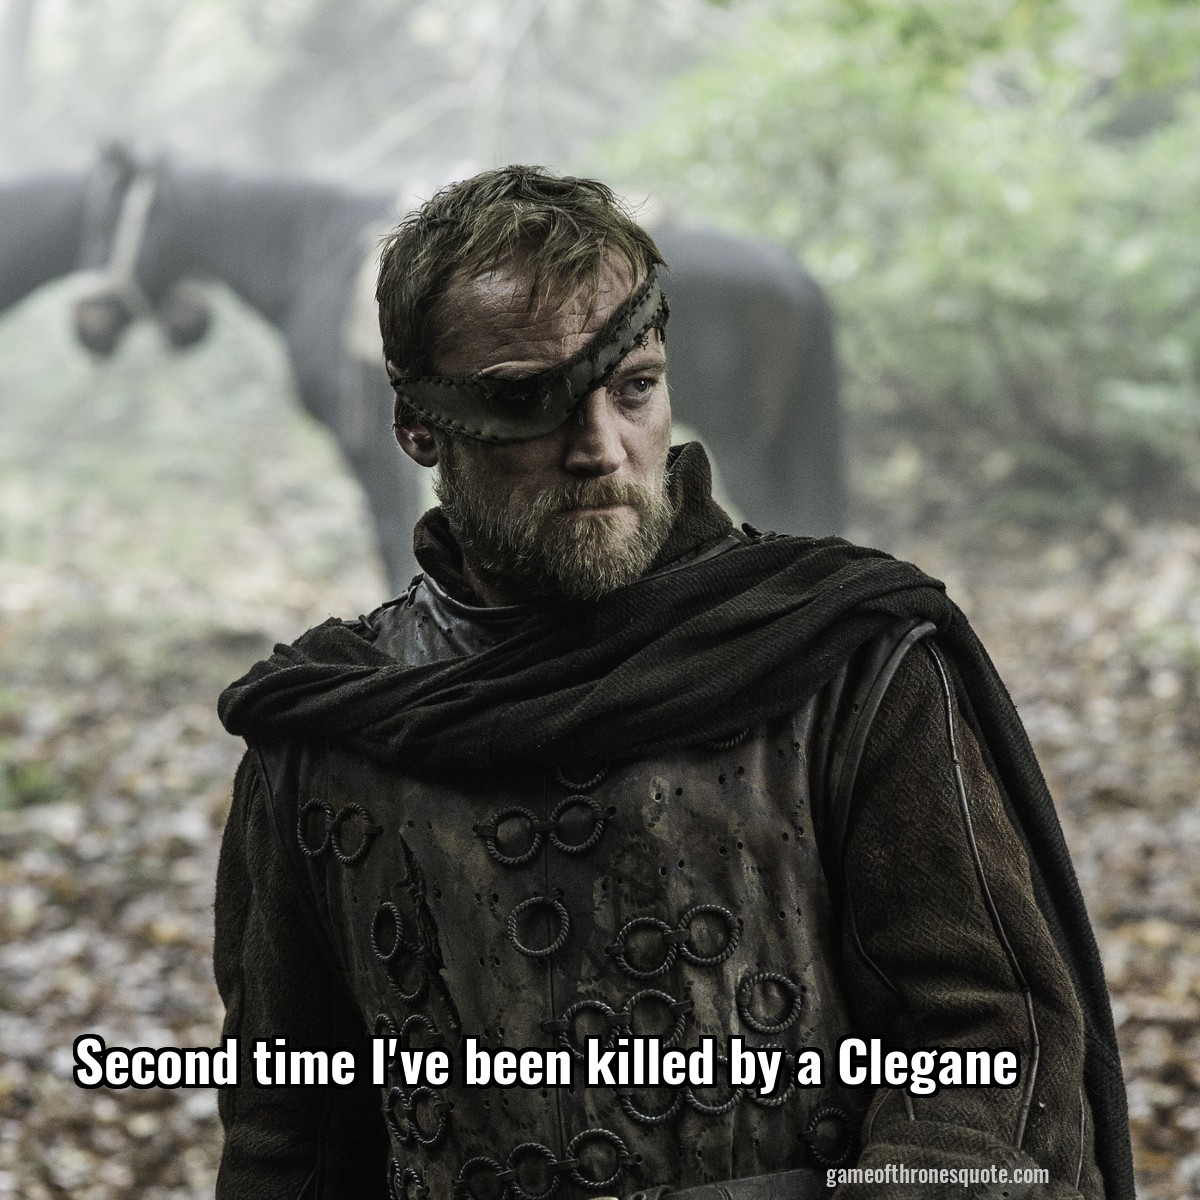 Second time I've been killed by a Clegane